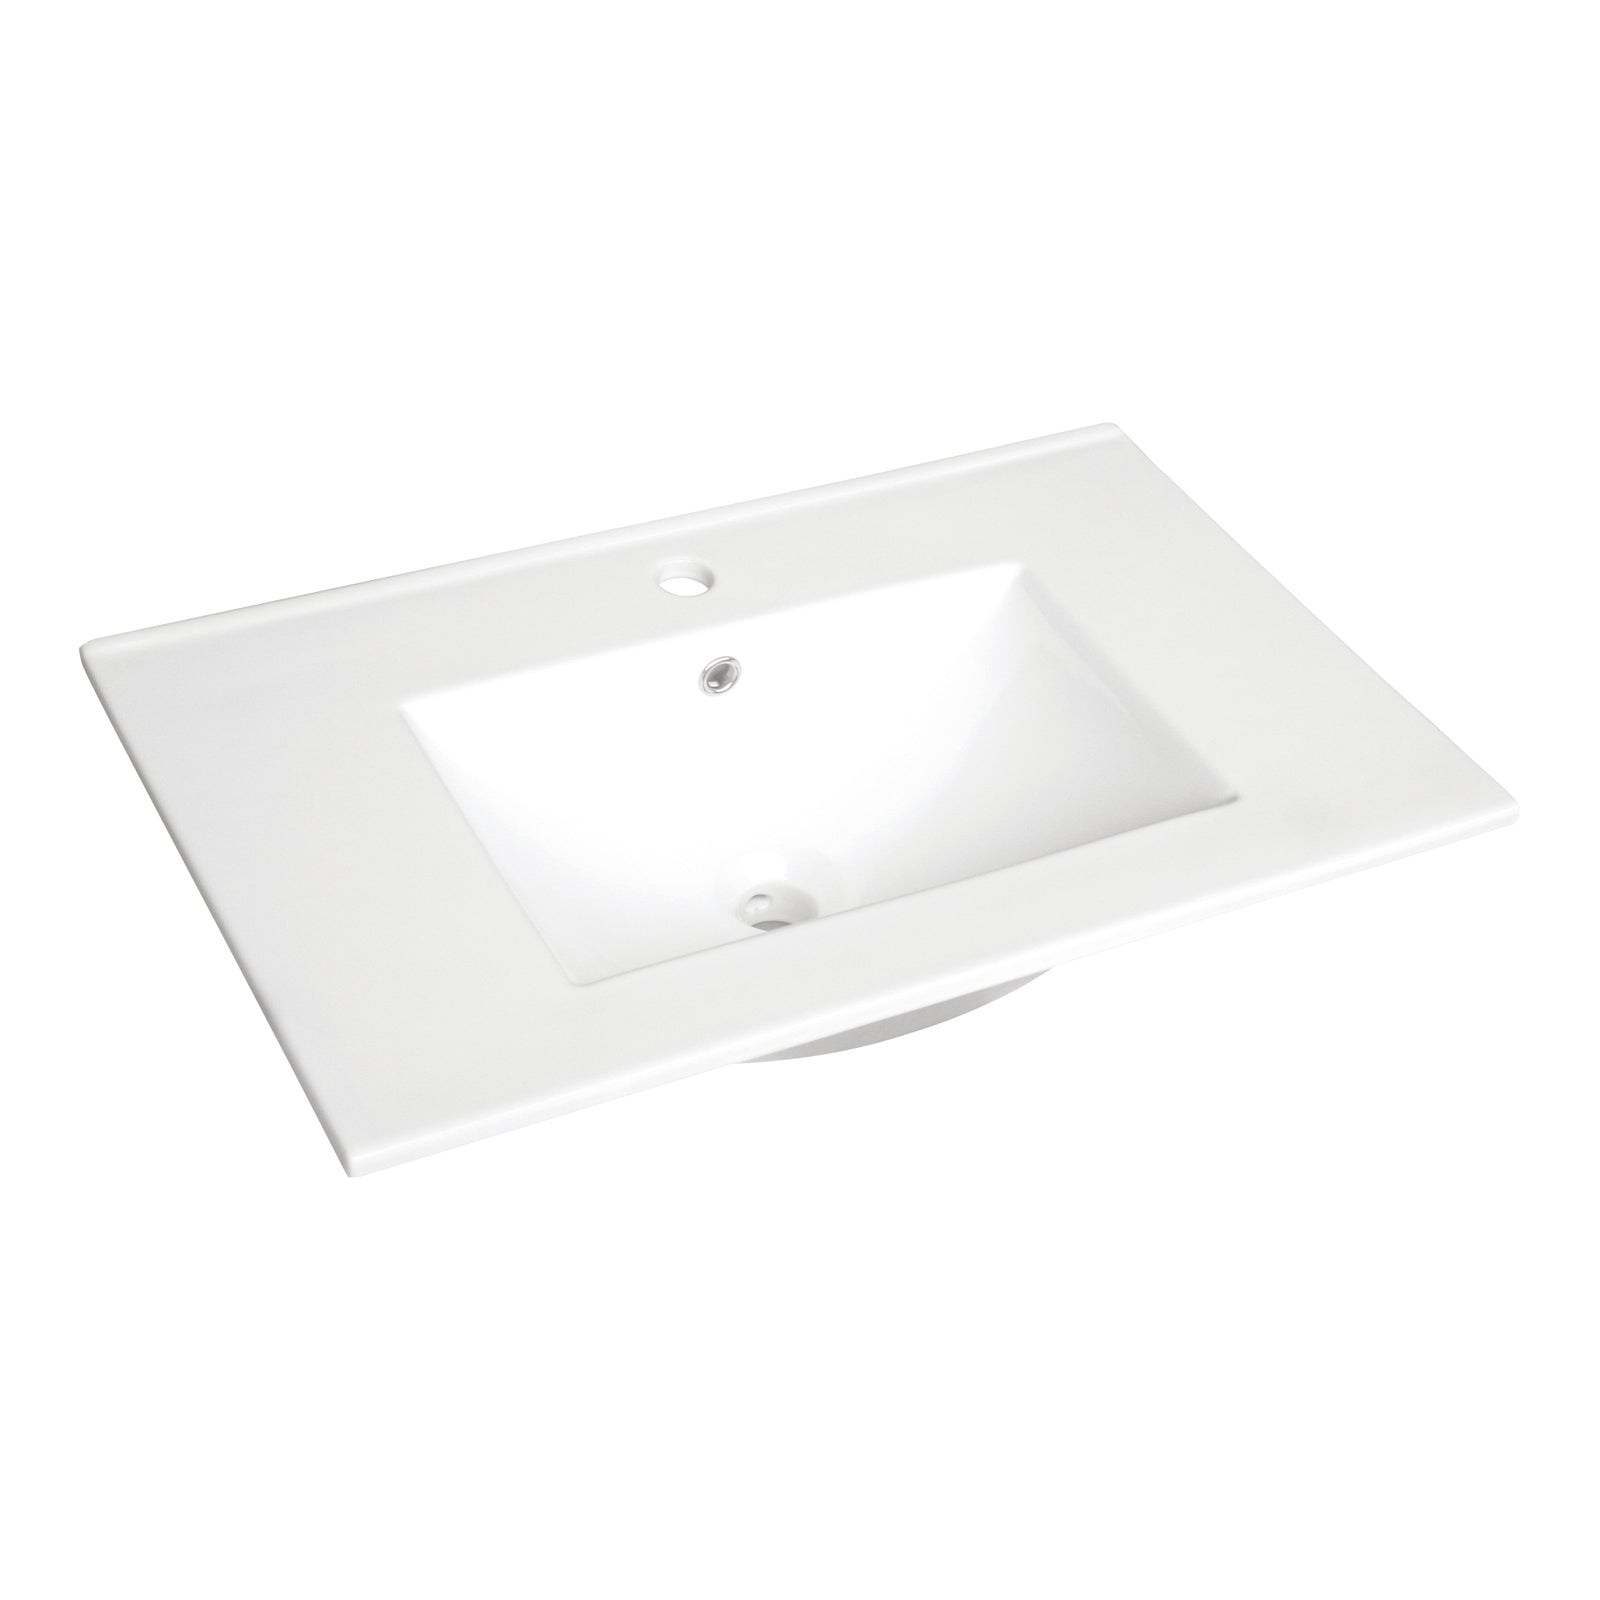 750mm Thin Edge Ceramic Vanity Basin with Overflow   1 Tap Hole